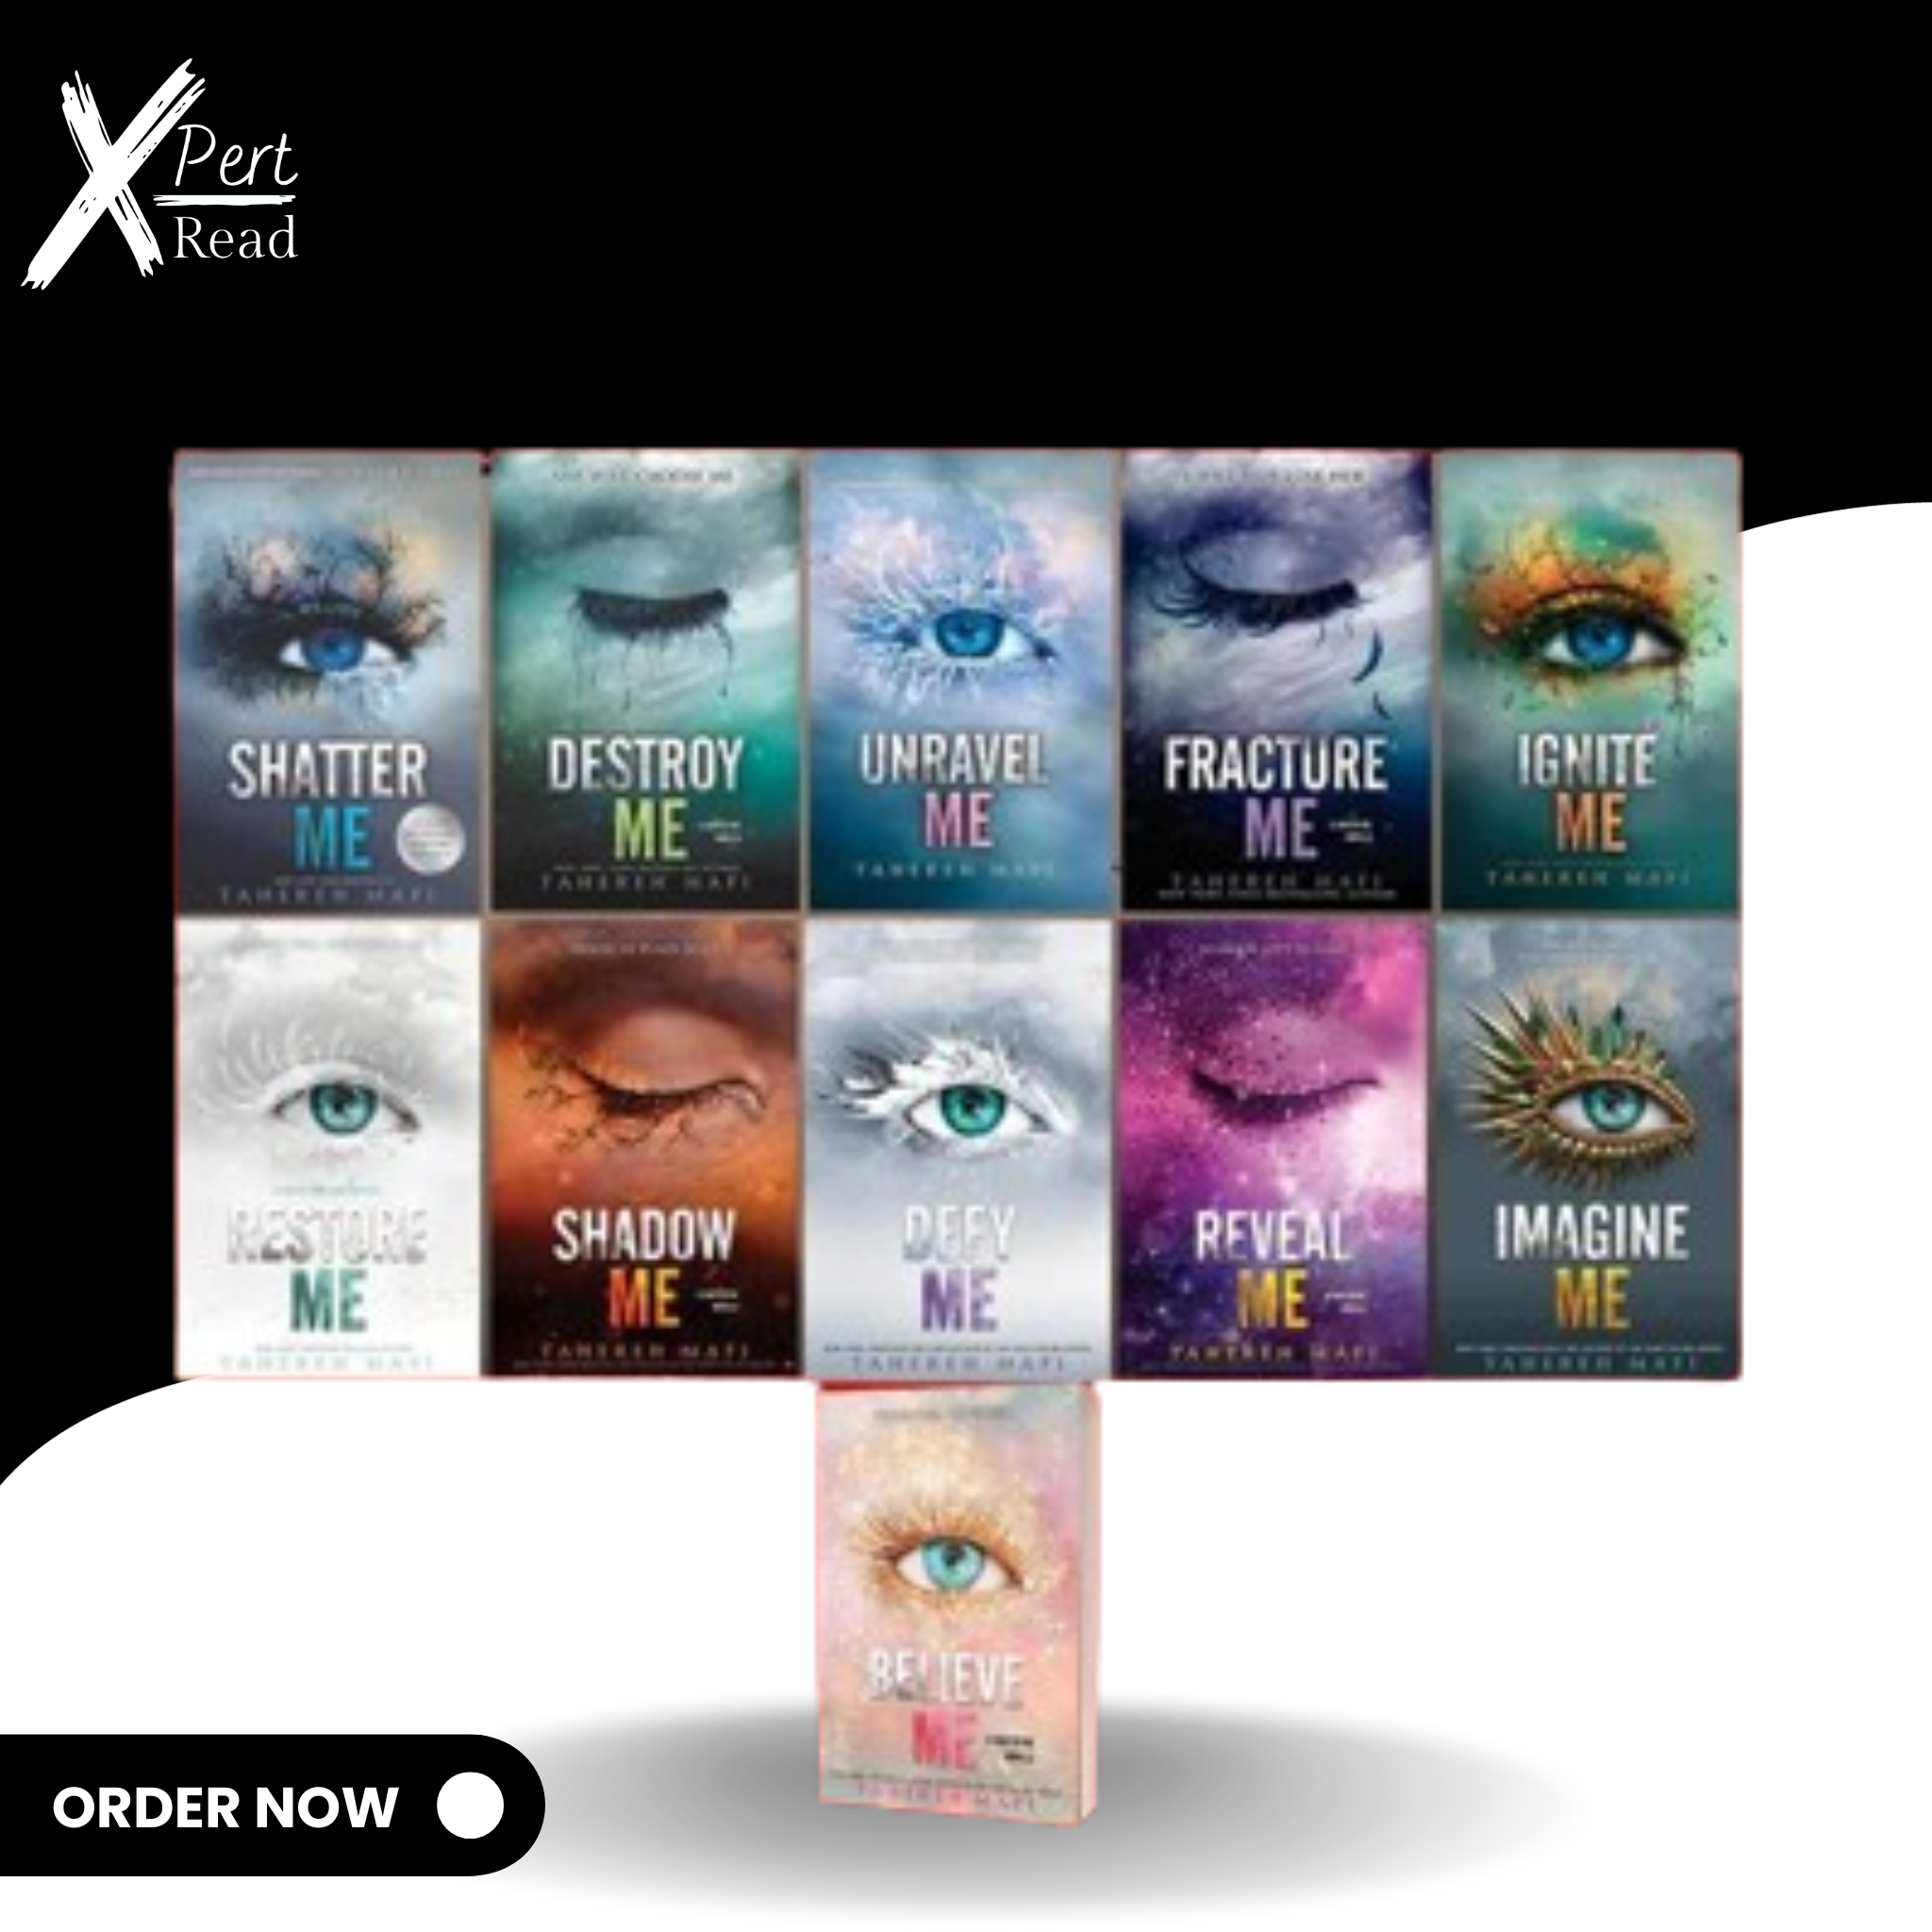 Shatter Me Complete Series By Tahereh Mafi (11 Books)